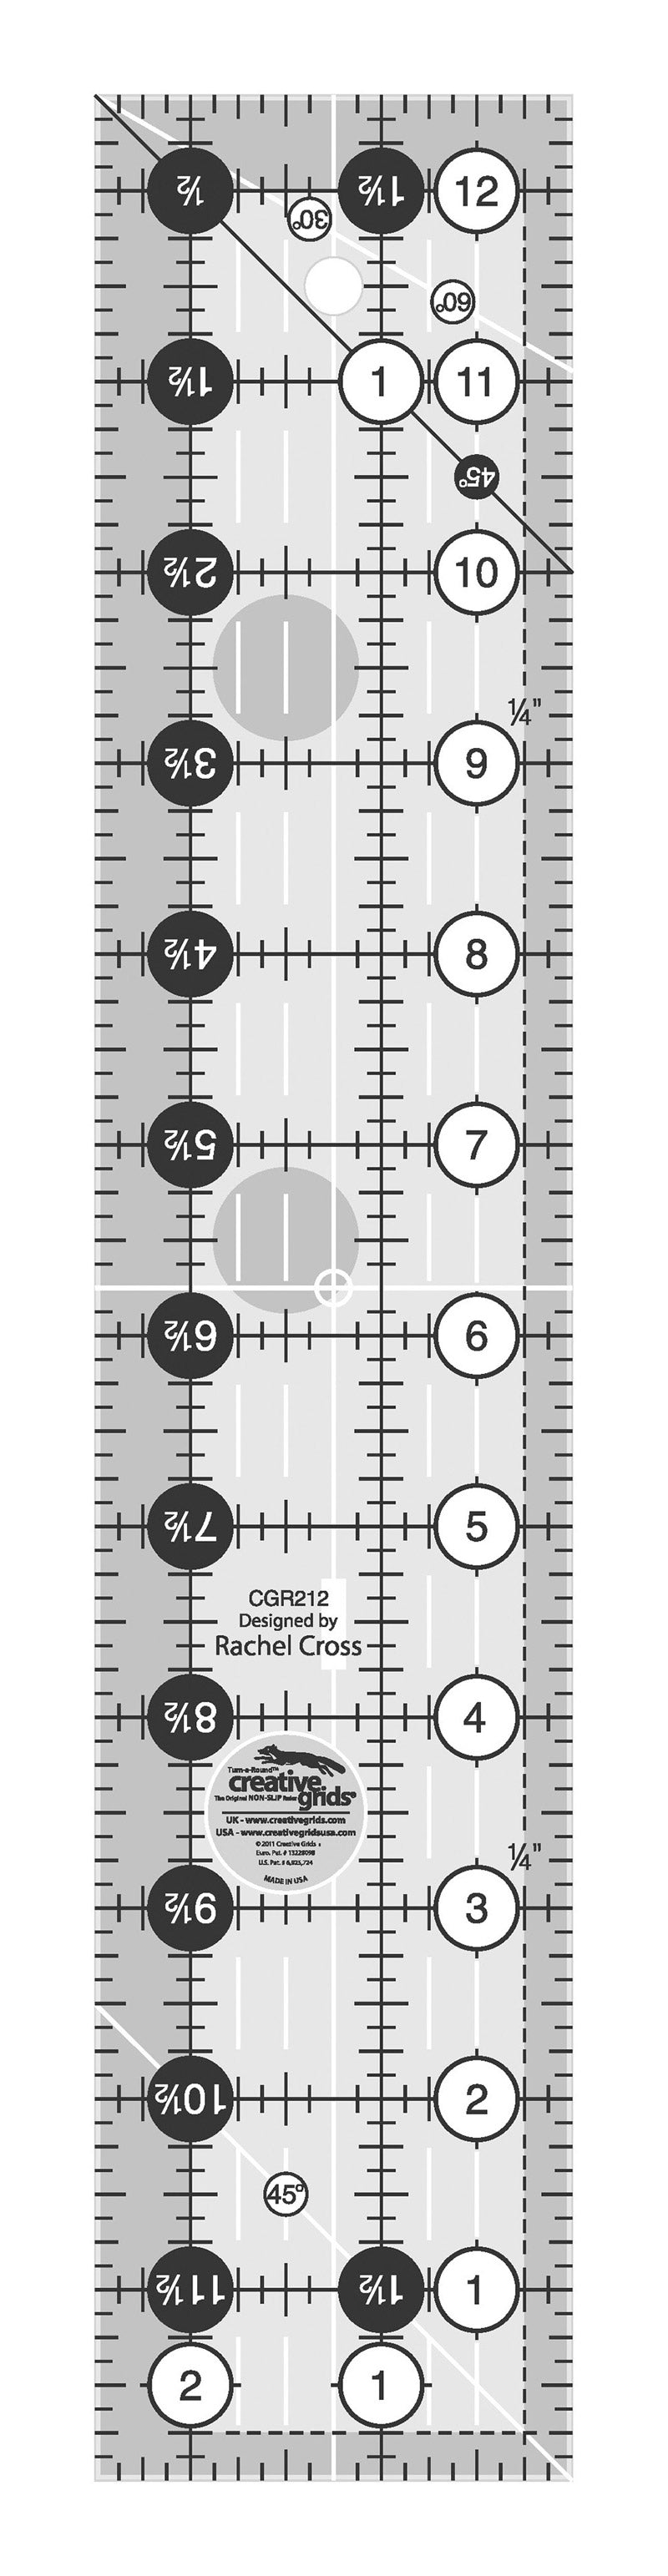 Creative Grids 2-1/2-Inch X 12-1/2-Inch Quilt Ruler (CGR212)